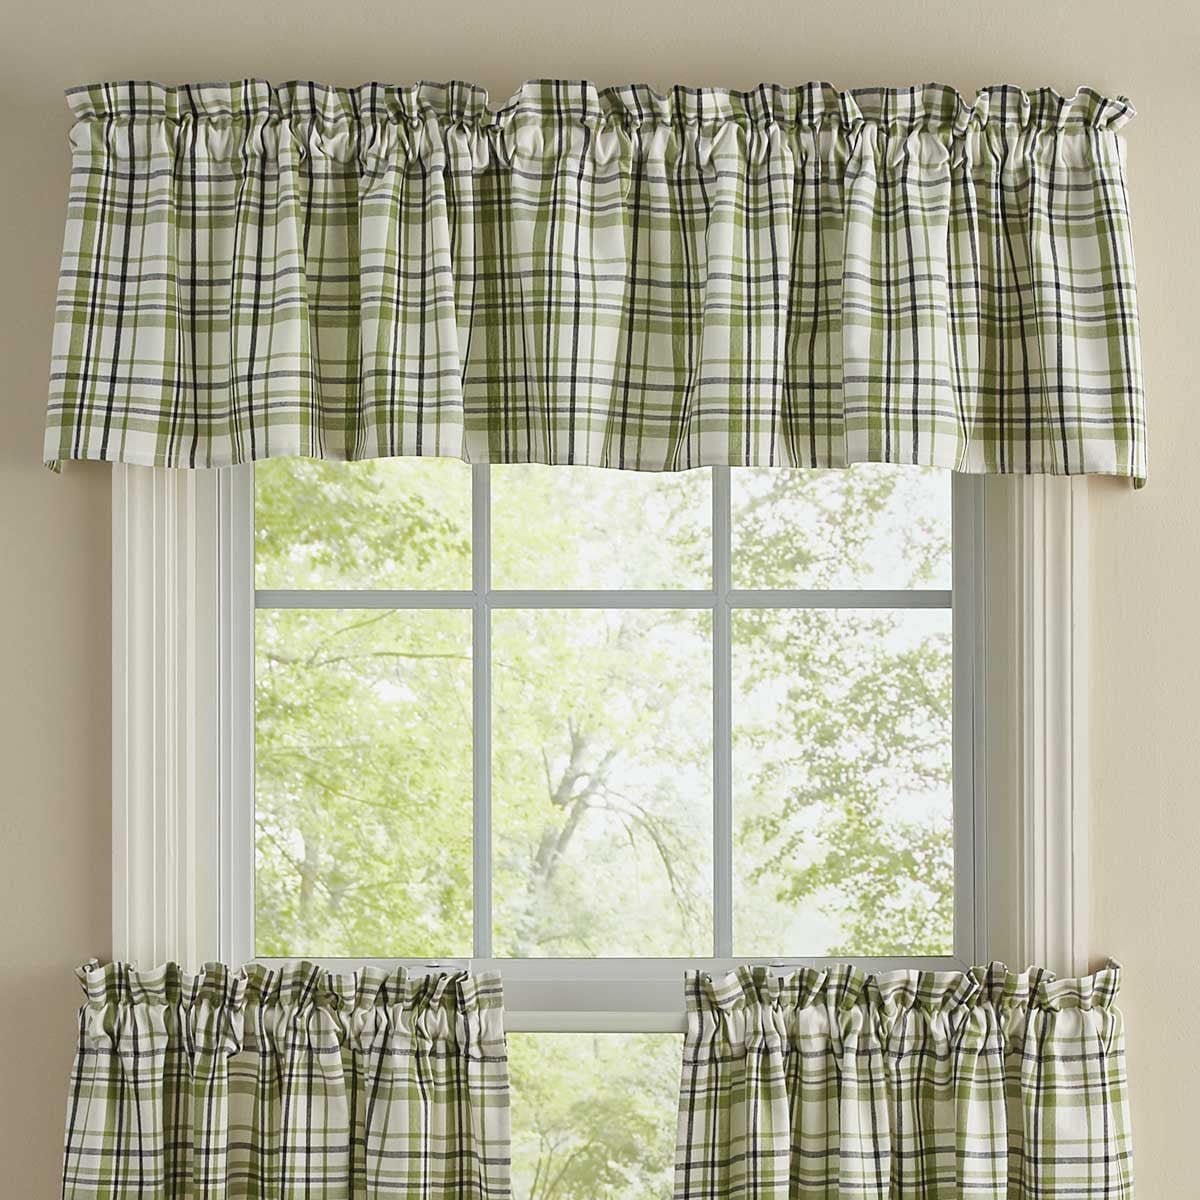 Time In A Garden Valance Unlined-Park Designs-The Village Merchant